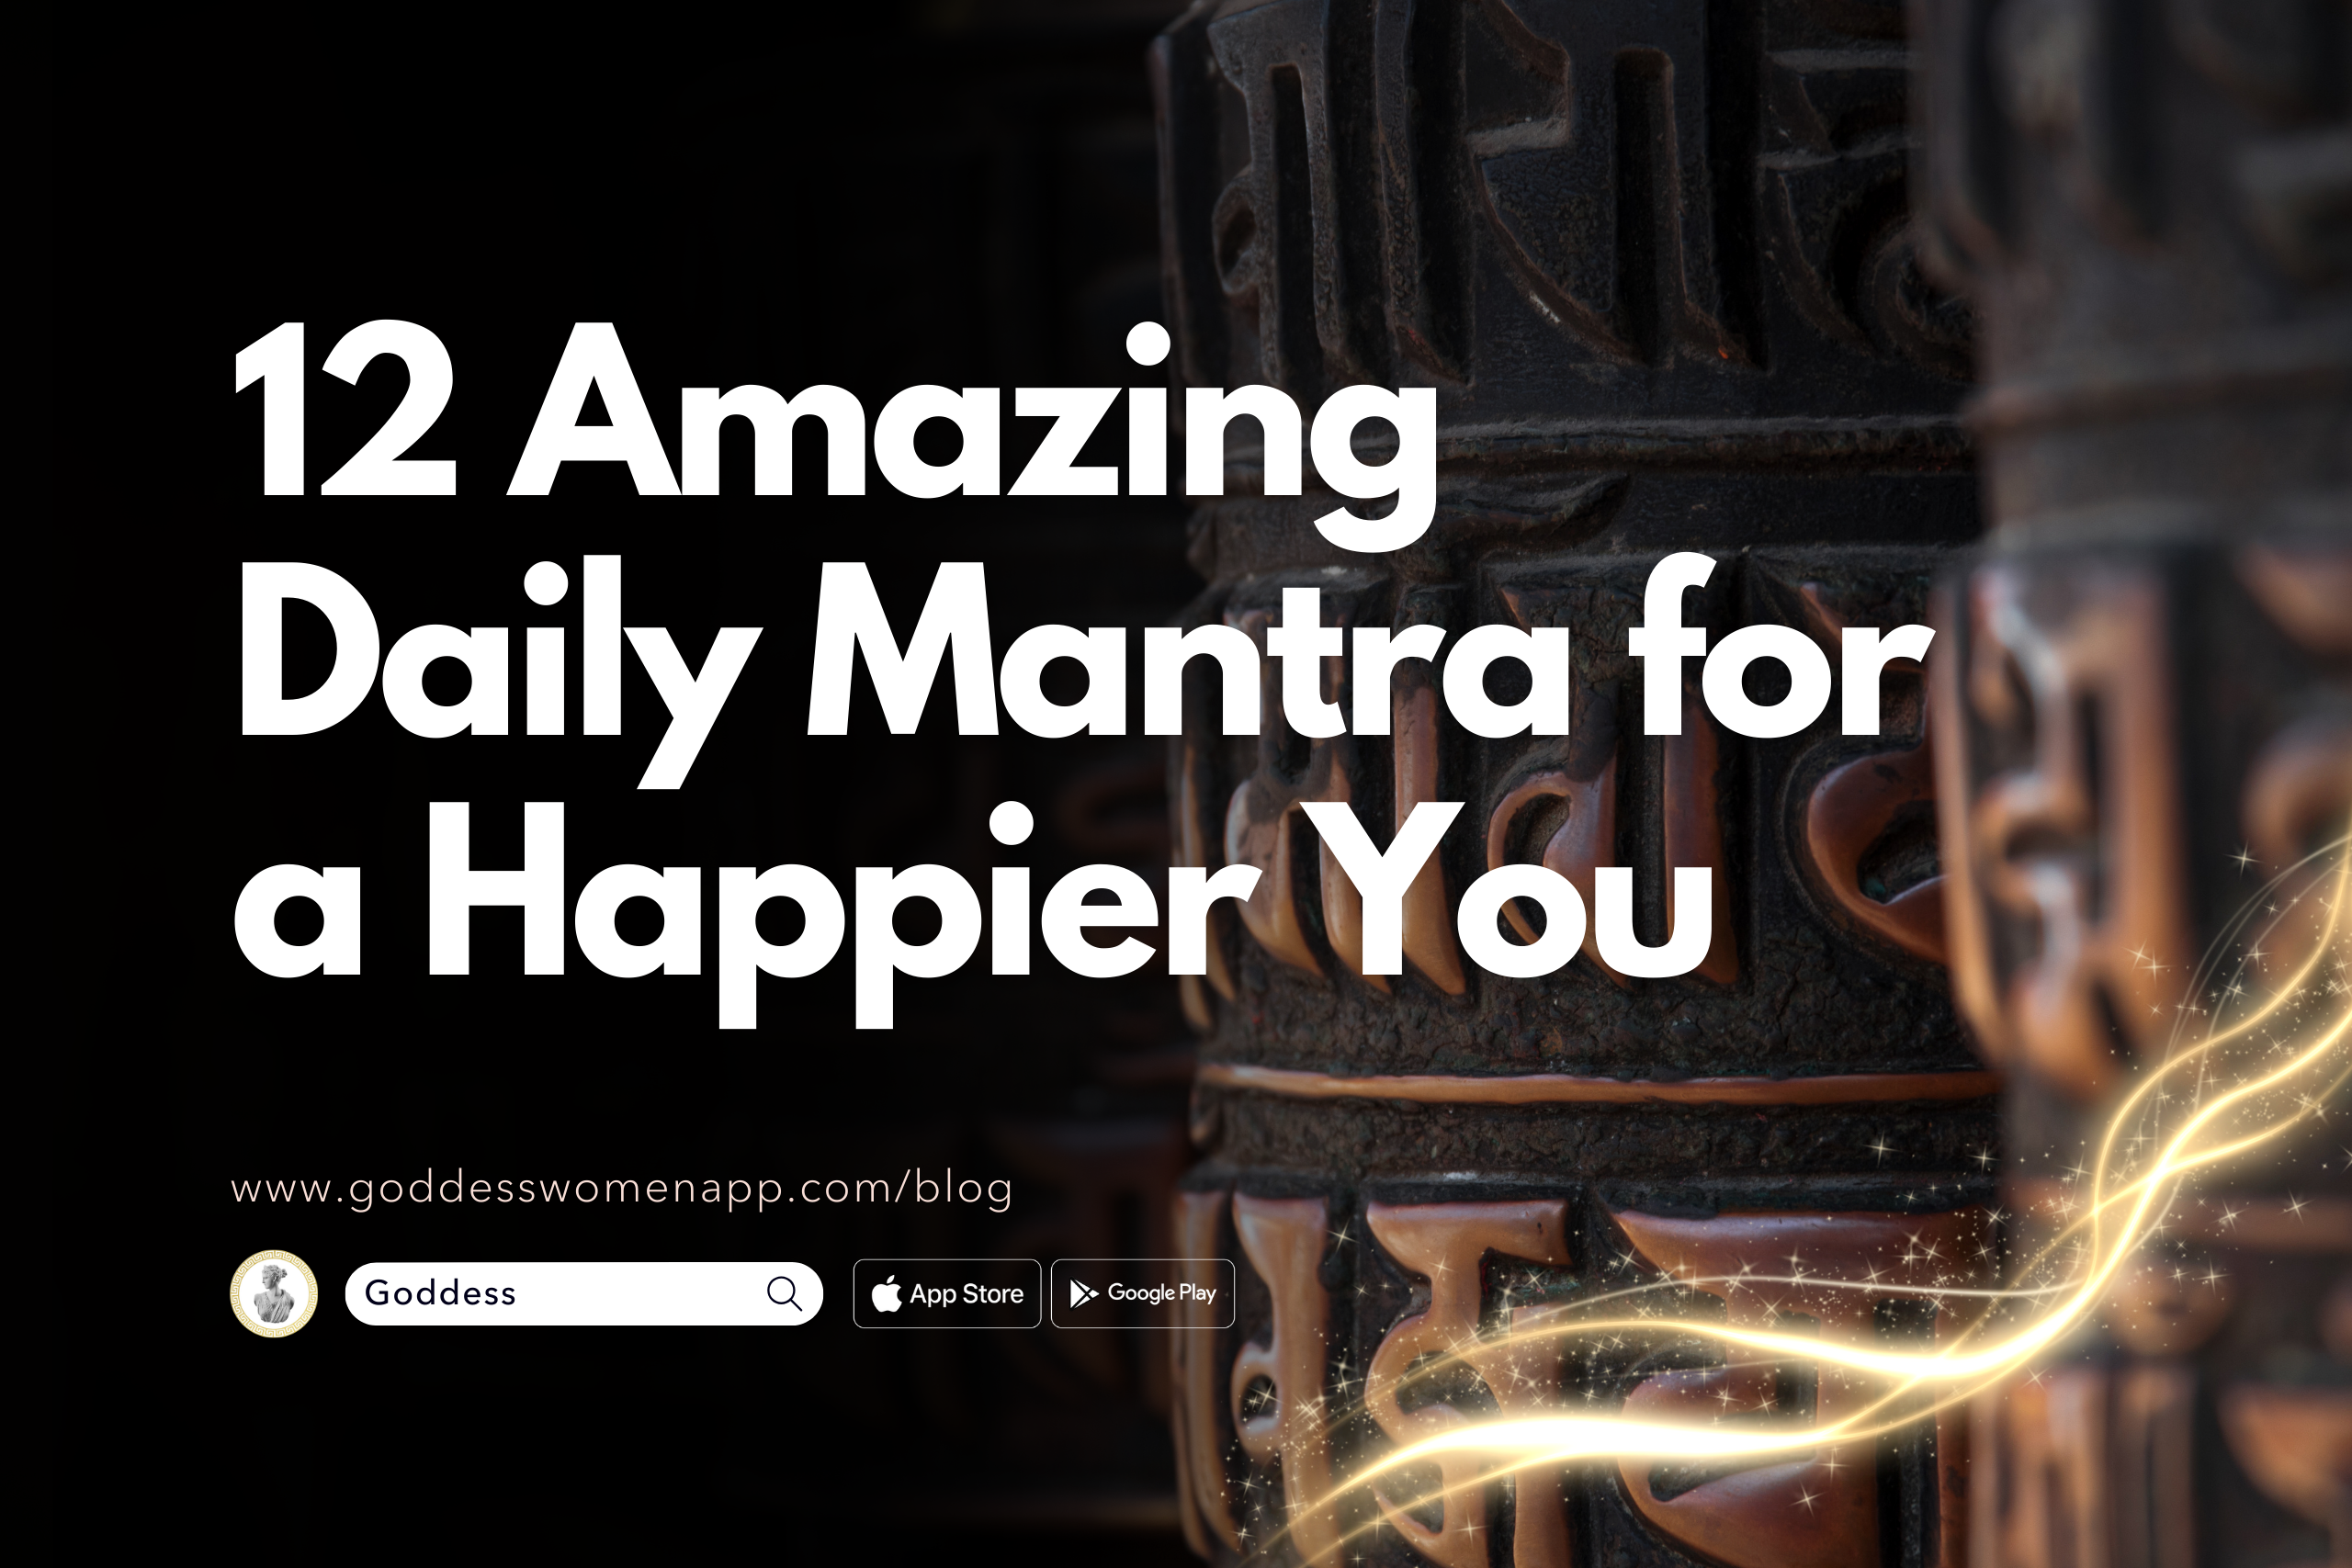 12 Amazing Daily Mantra for a Happier You